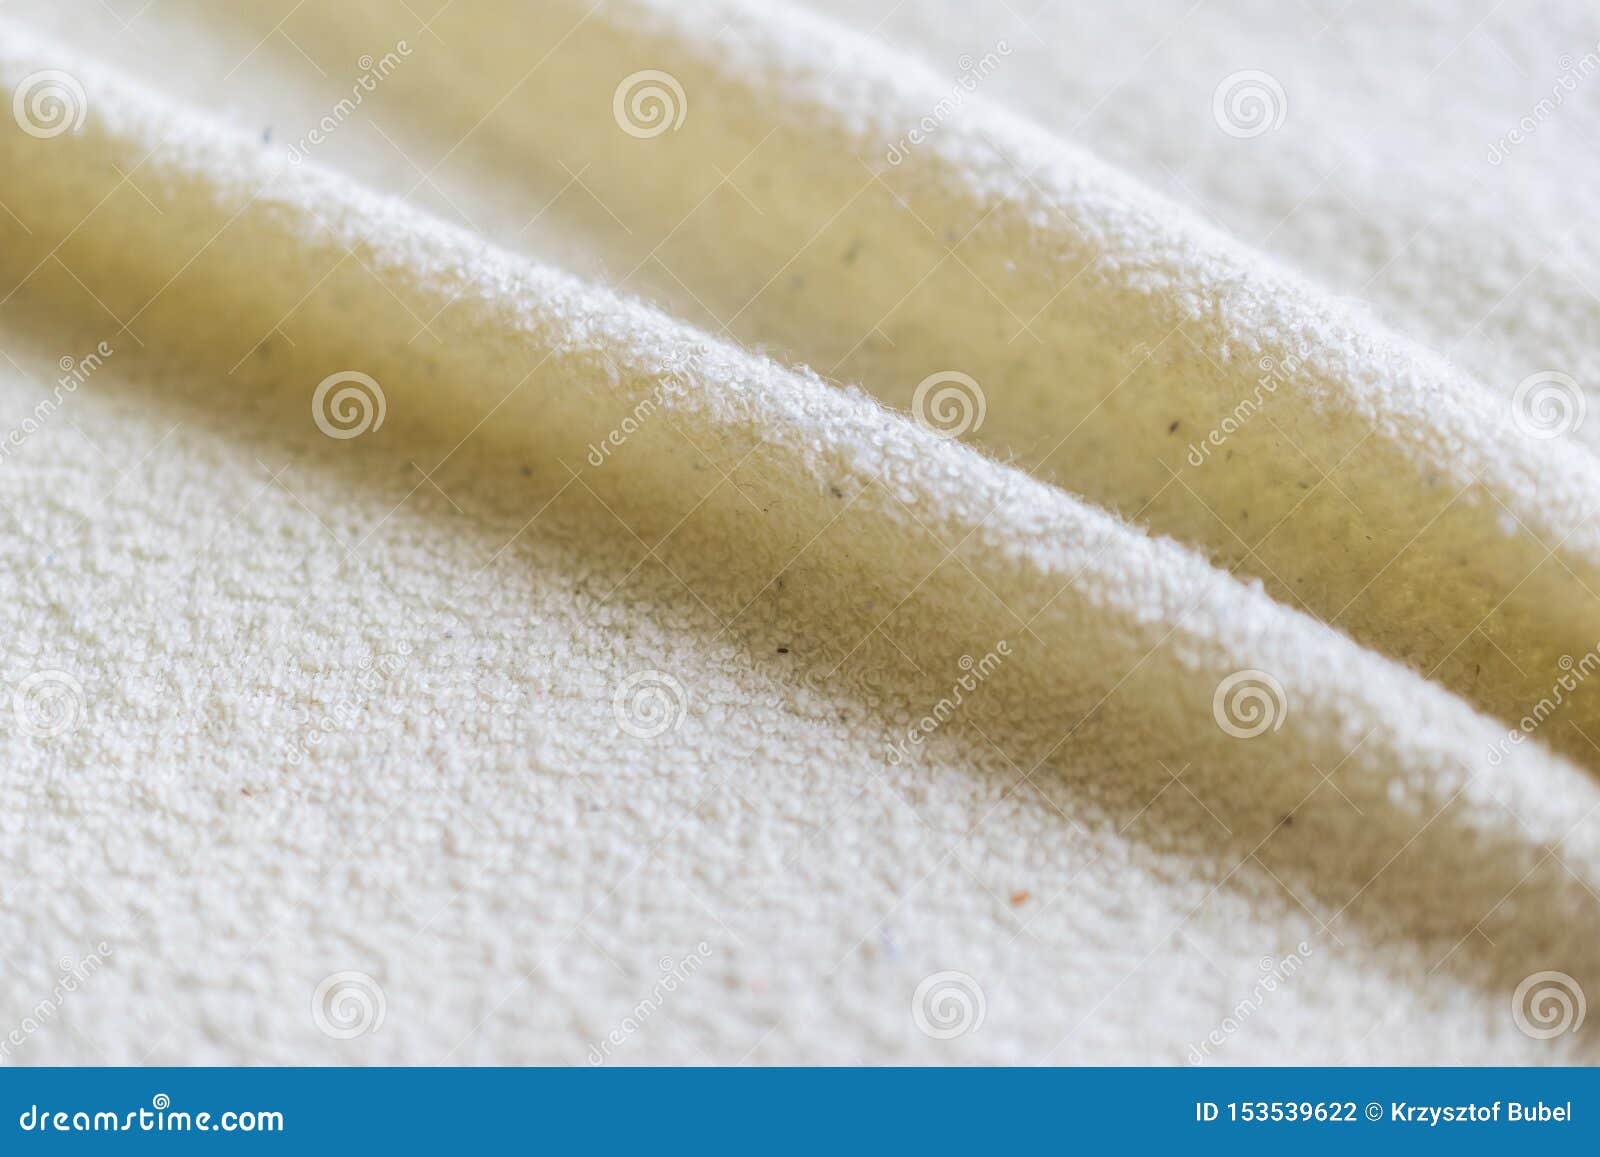 Yellow Wrinkled Cotton Material Texture Stock Photo - Image of satin ...